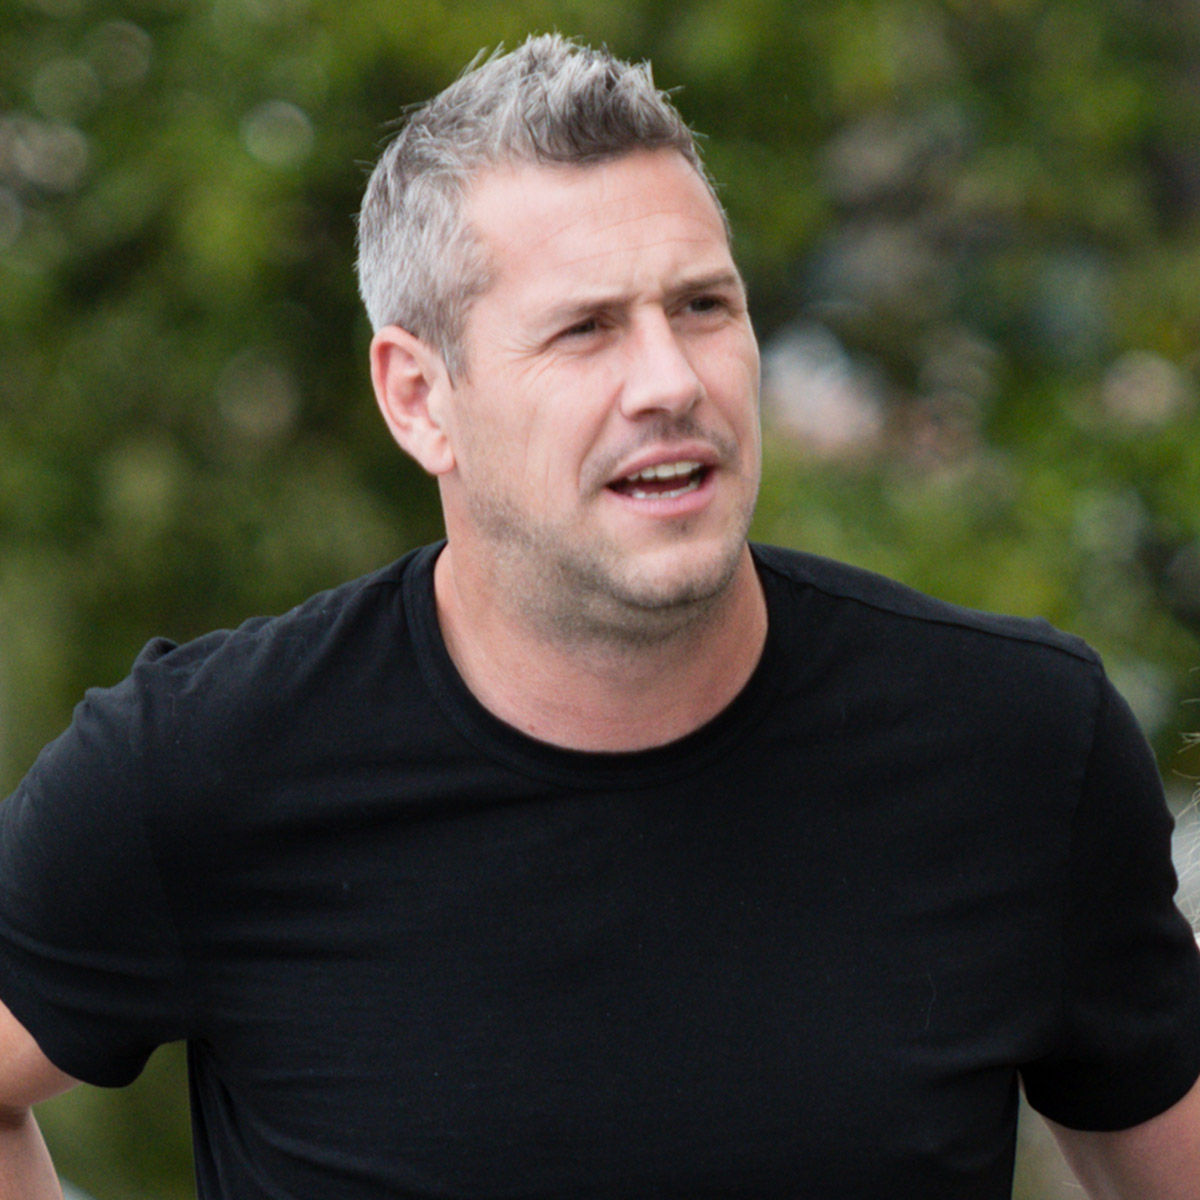 Ant Anstead Denies Claim He’s Trying to “Take Away” Son